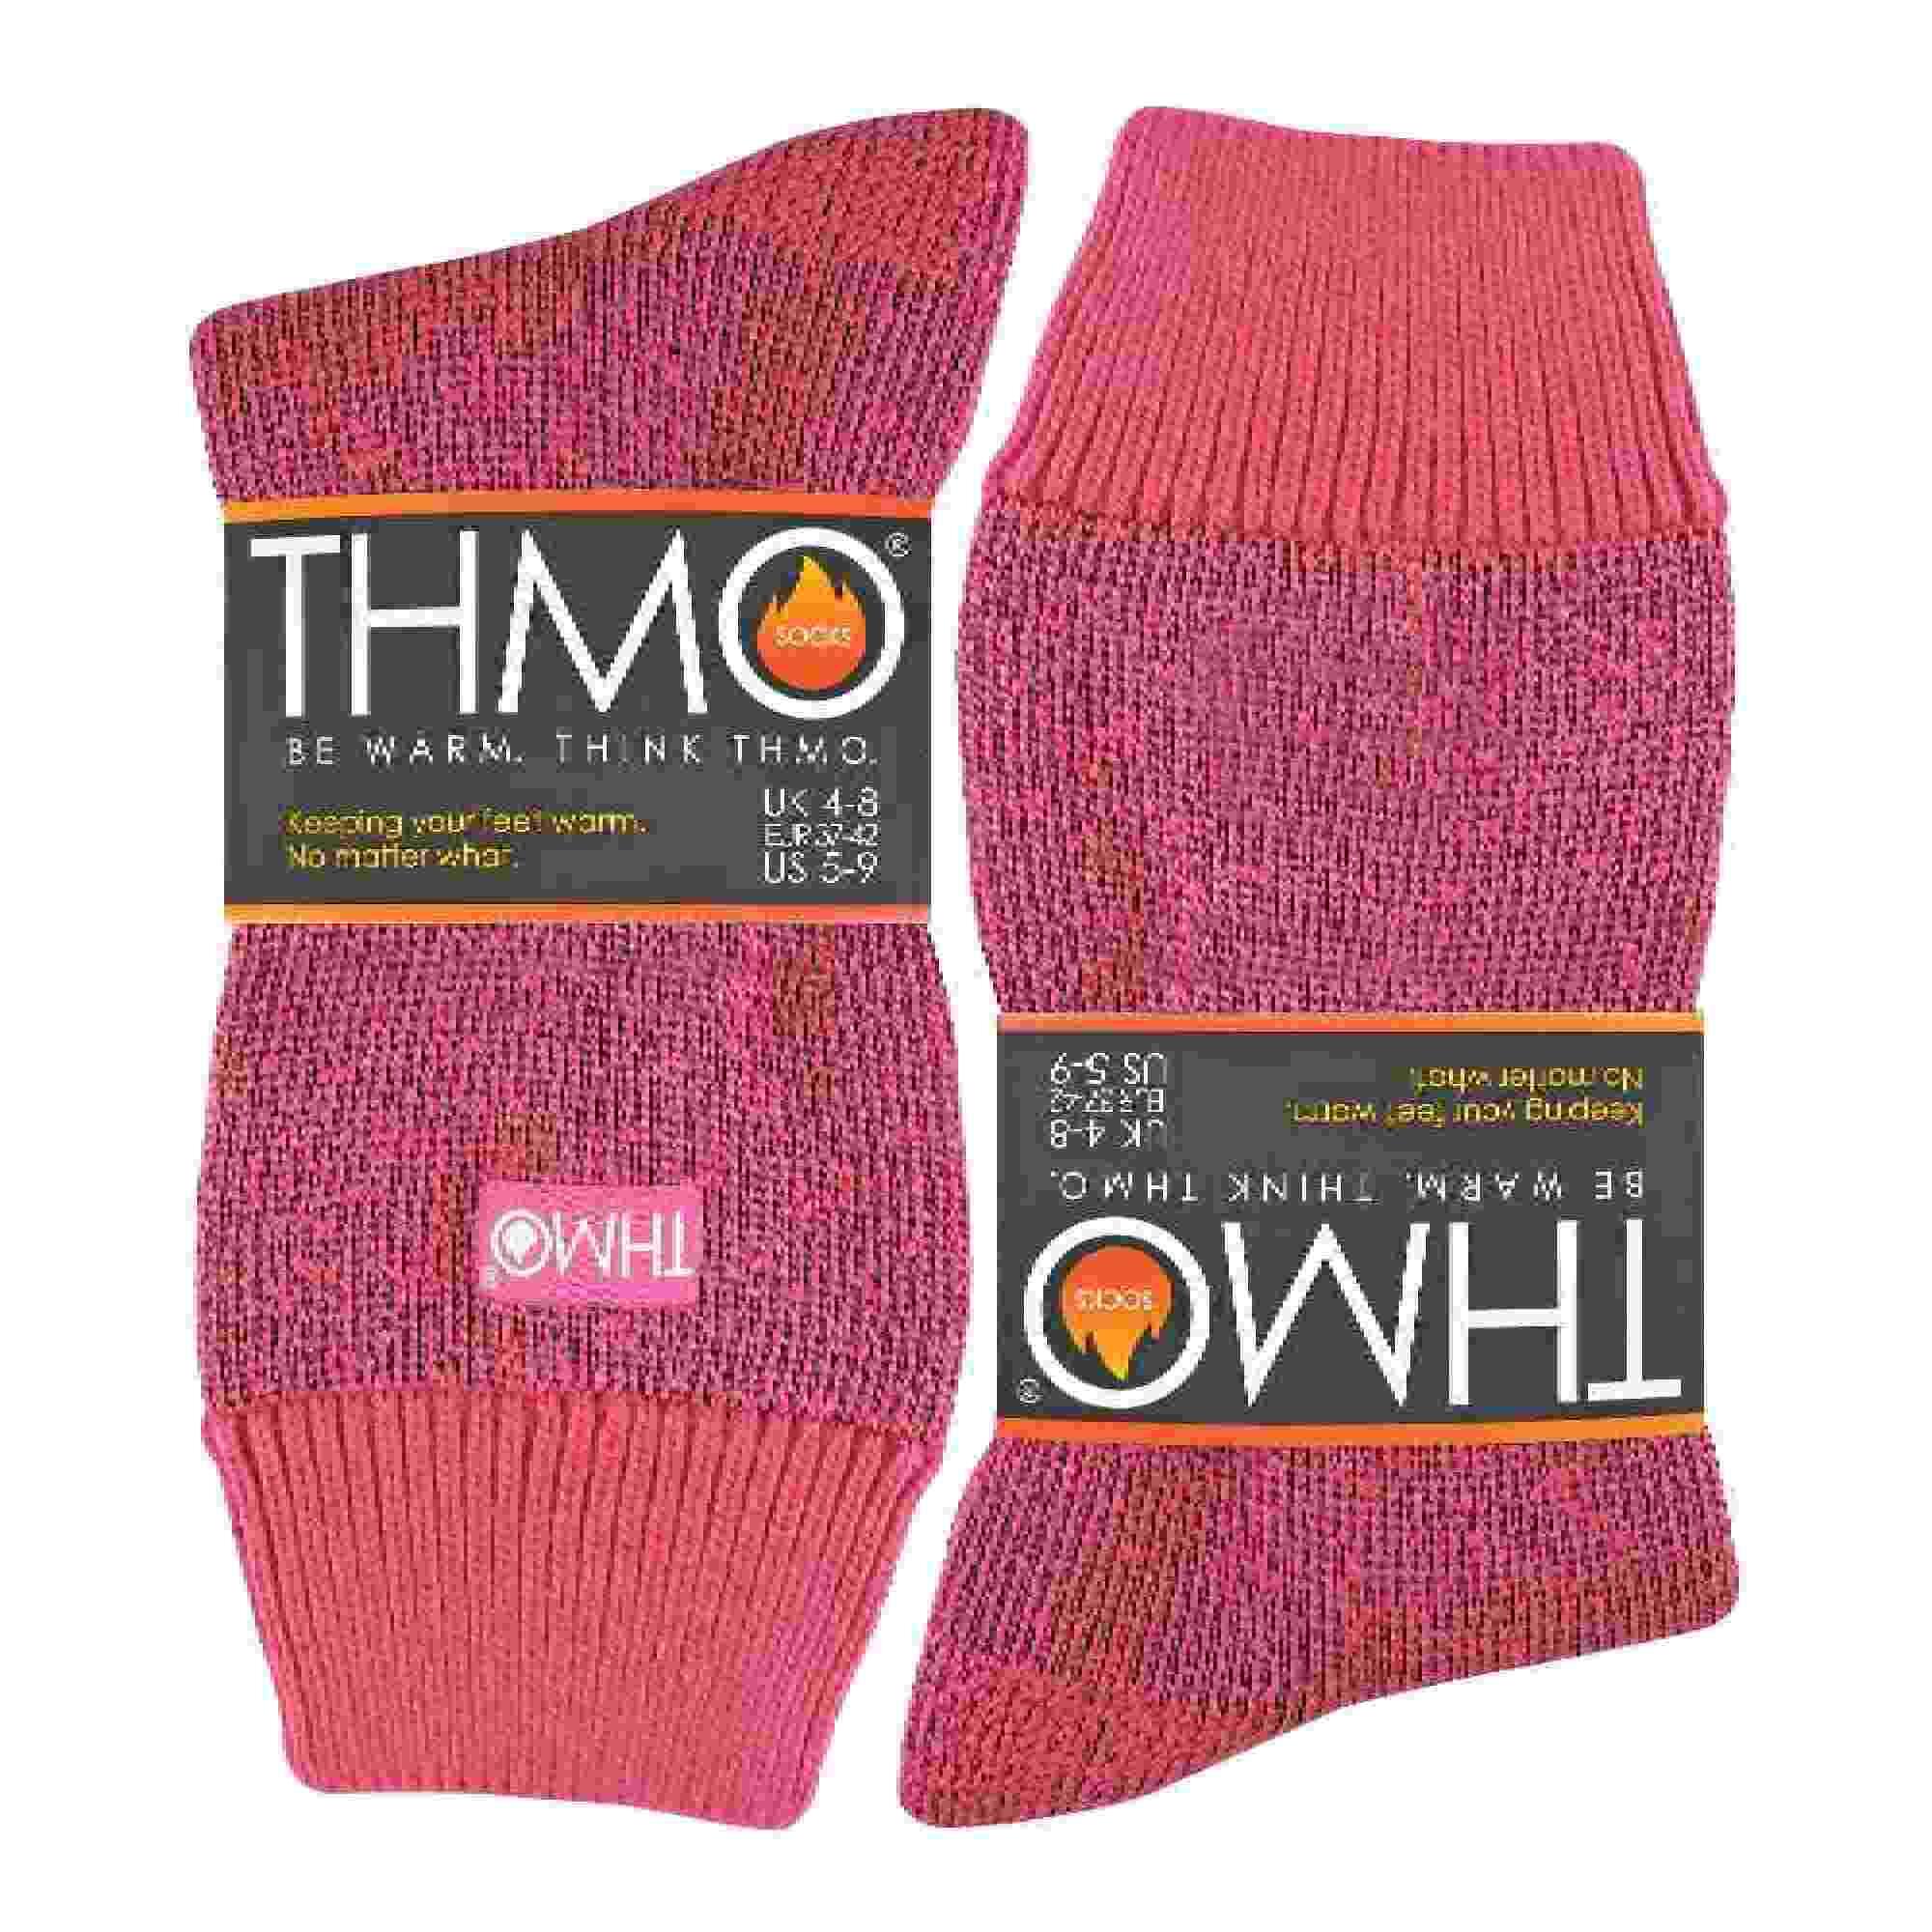 1 Pair Ladies Thick Fleece Lined Warm Thermal Socks for Winter 2/7